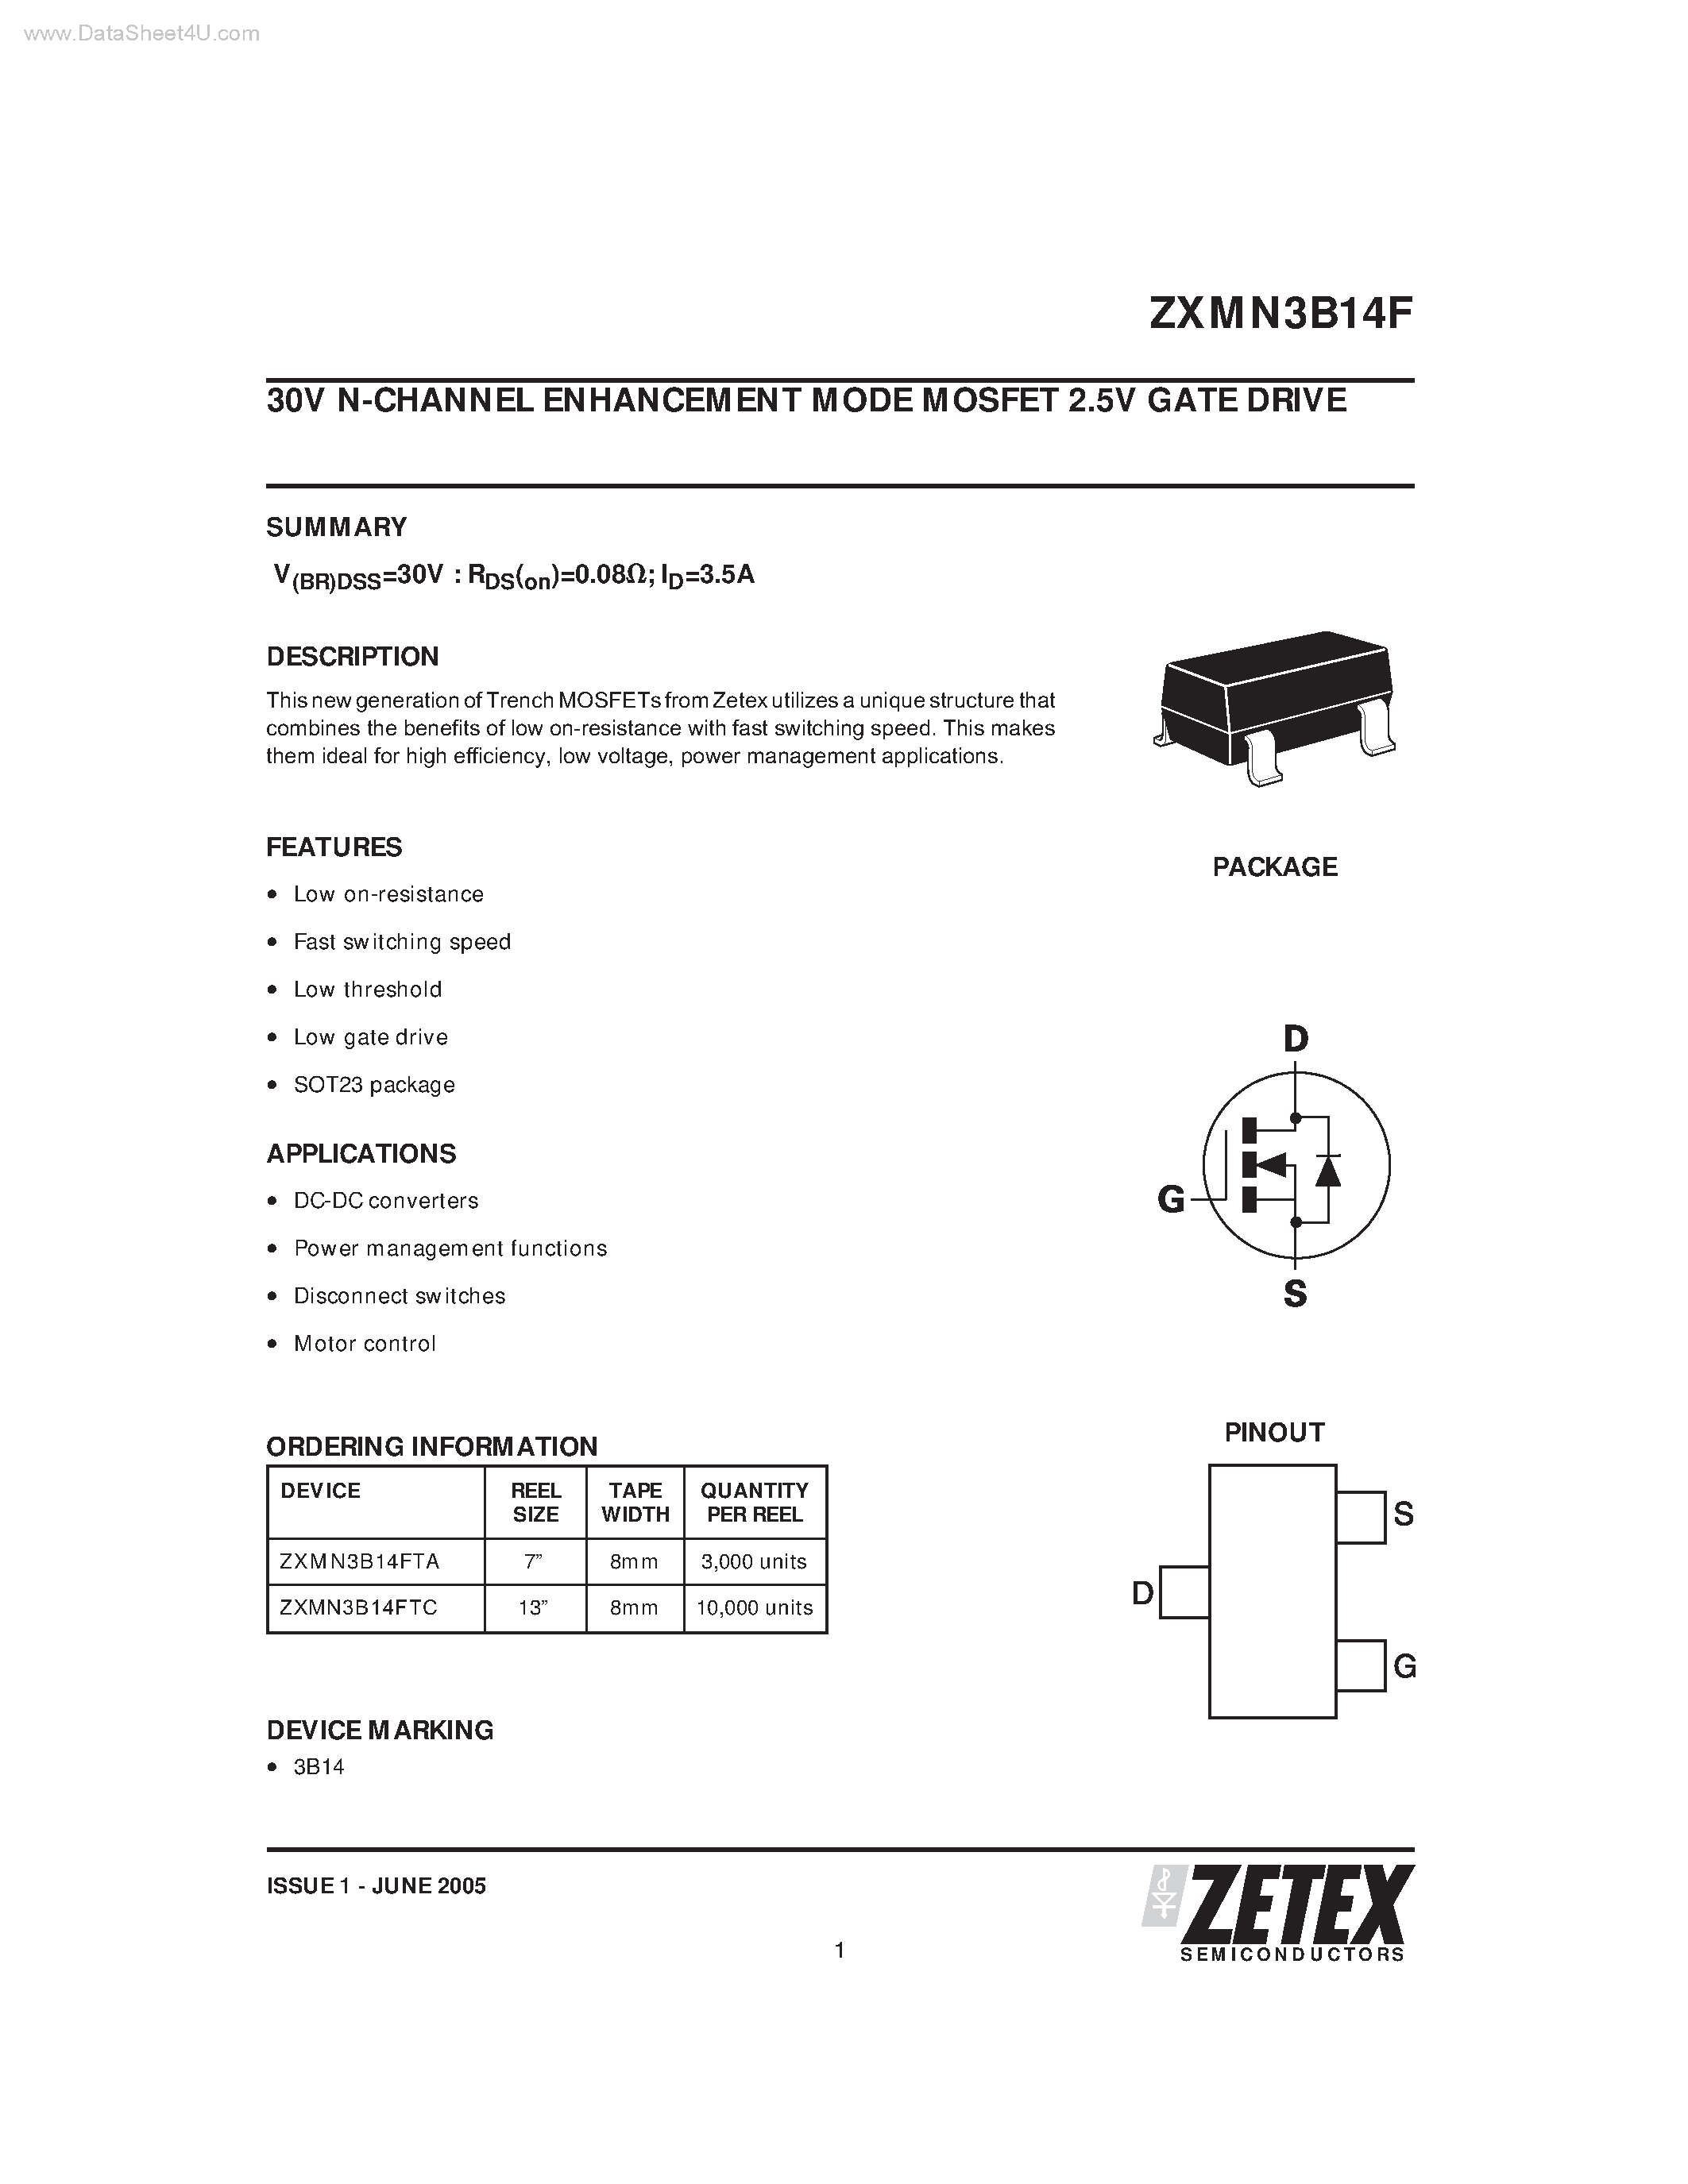 Datasheet ZXMN3B14F - N-CHANNEL ENHANCEMENT MODE MOSFET 2.5V GATE DRIVE page 1